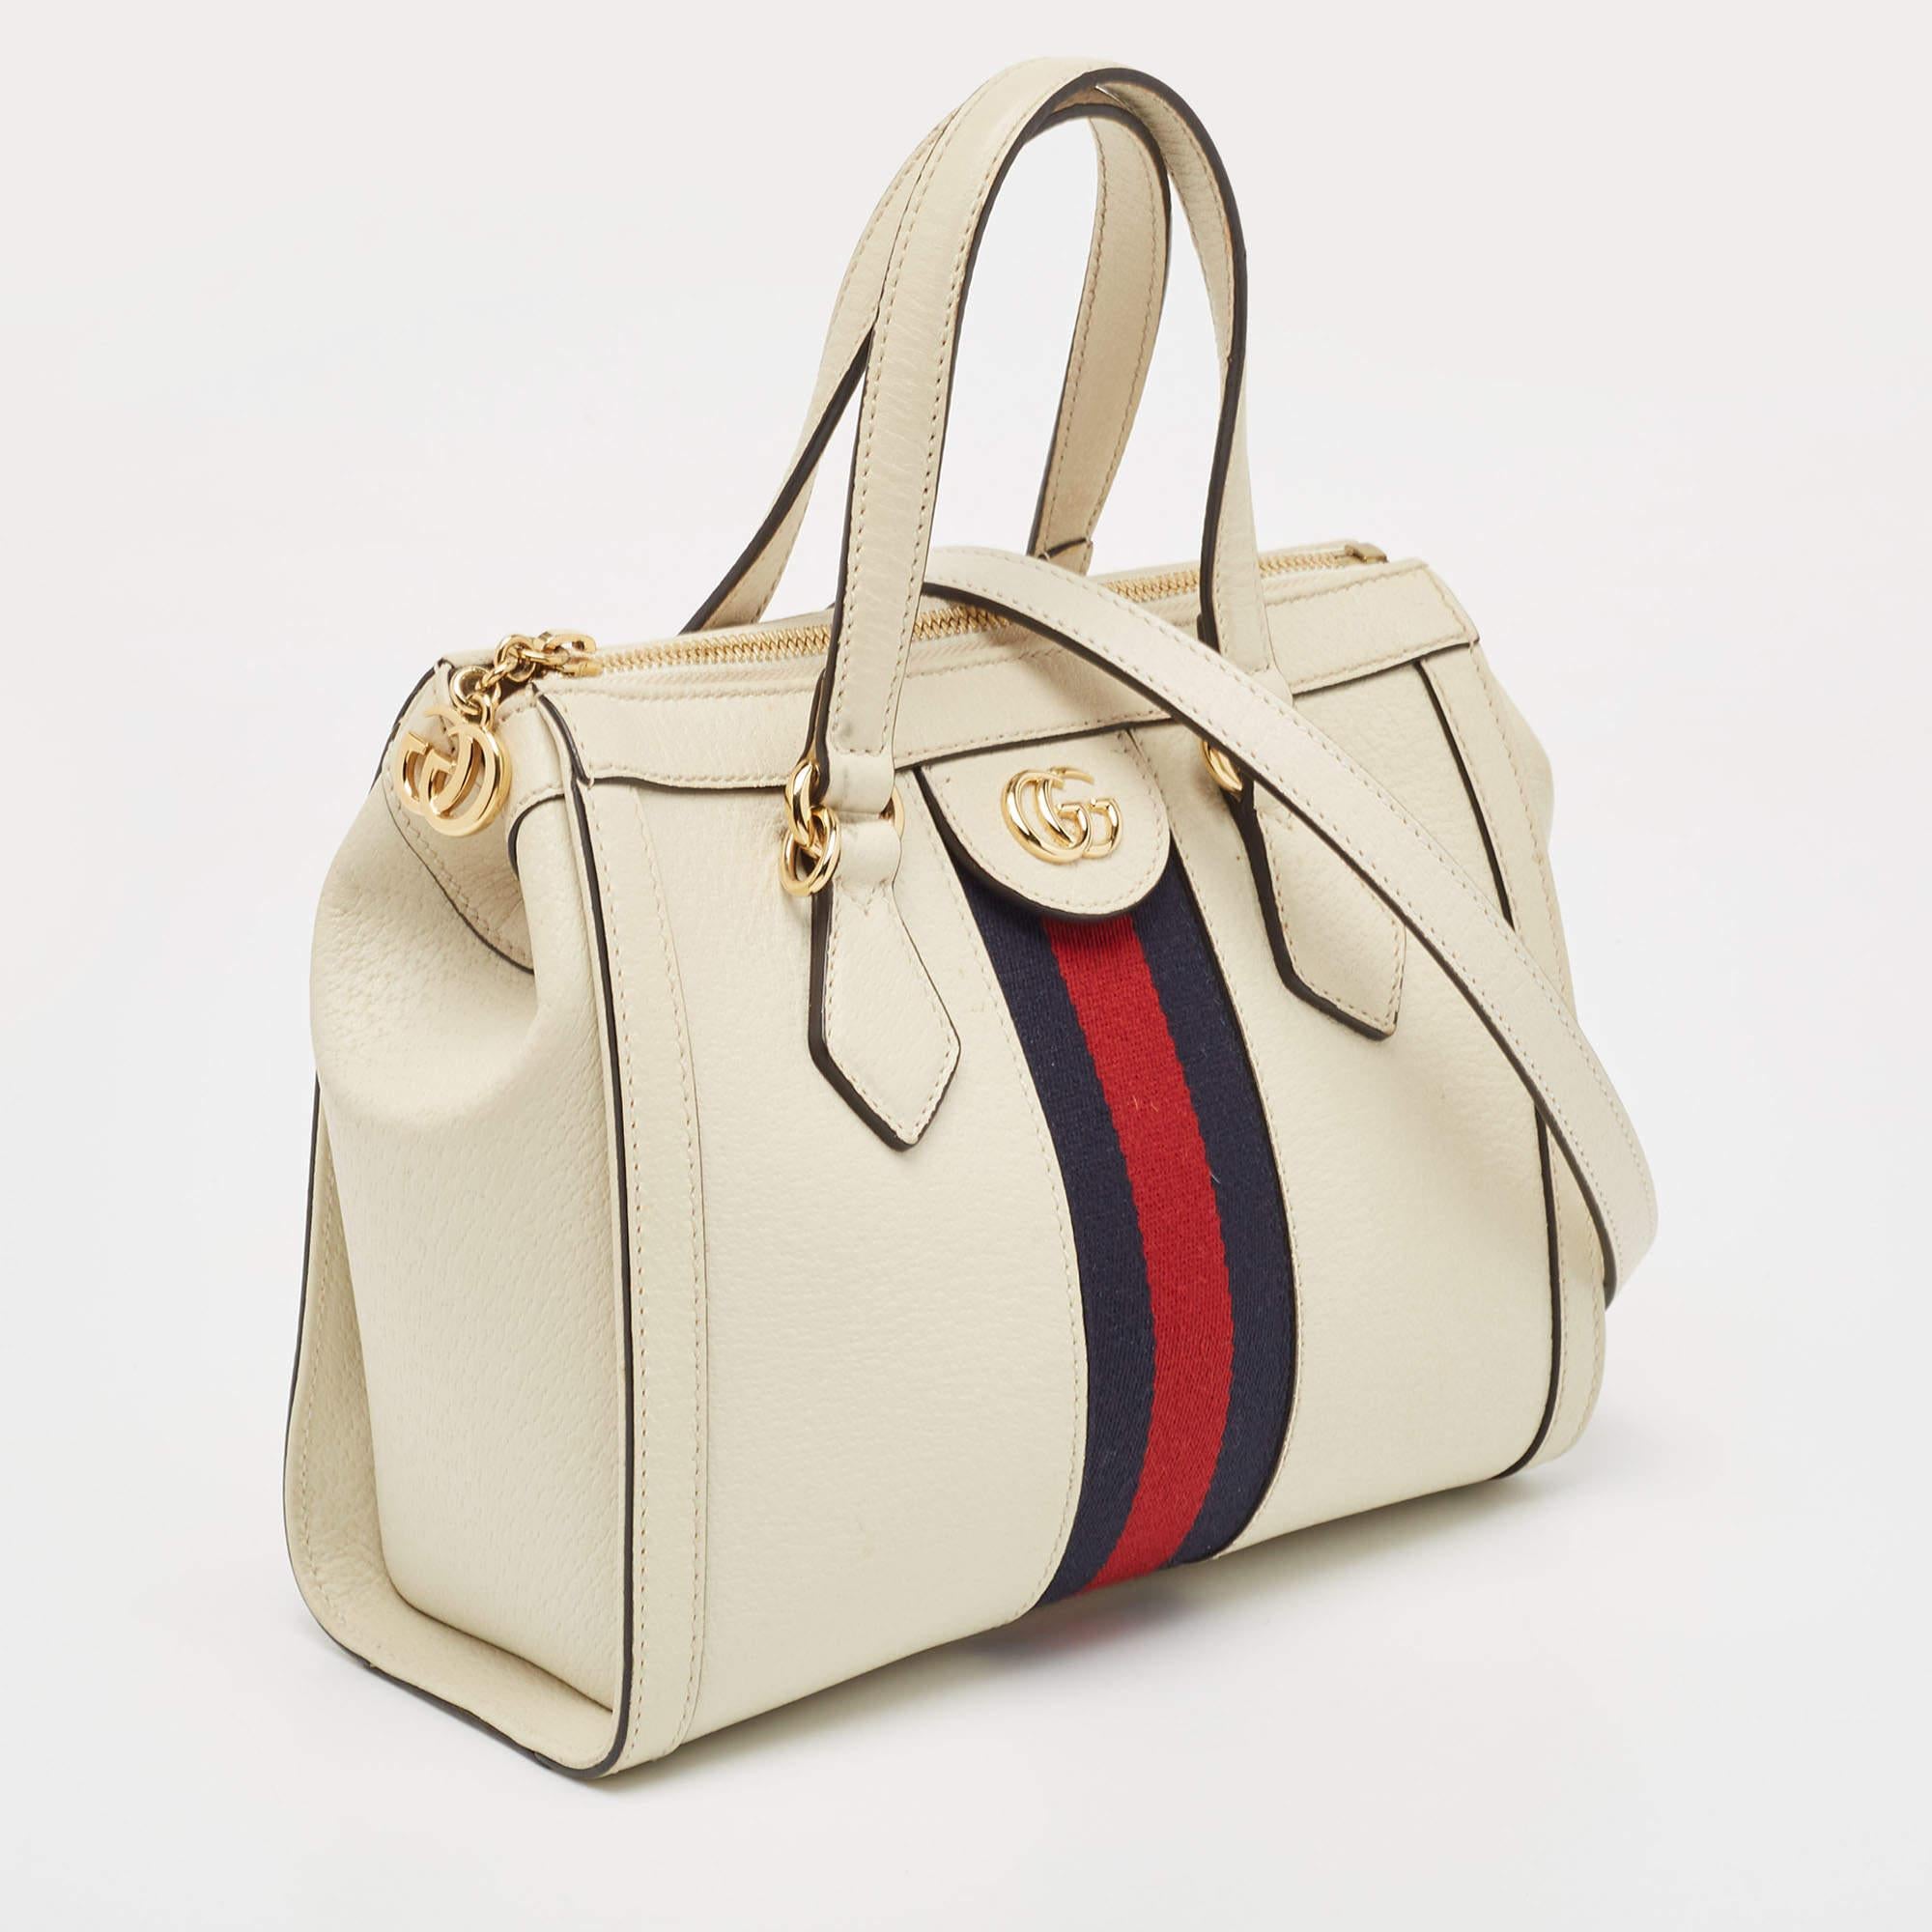 This alluring tote bag for women has been designed to assist you on any day. Convenient to carry and fashionably designed, the tote is cut with skill and sewn into a great shape. It is well-equipped to be a reliable accessory.

